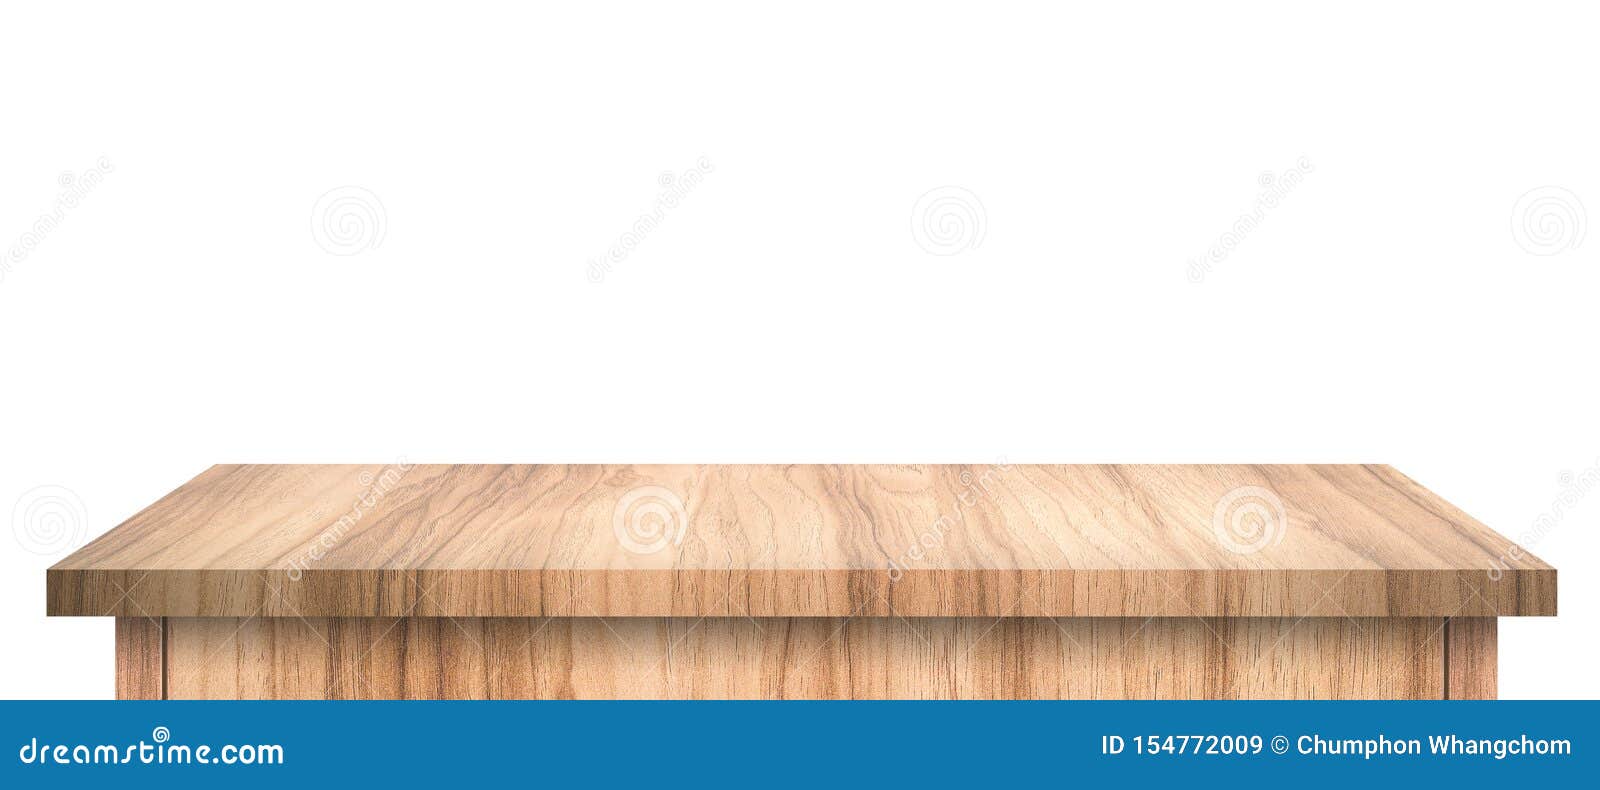 empty wood table with abstract pattern  on pure white background. wooden desk and shelf display board with perspective